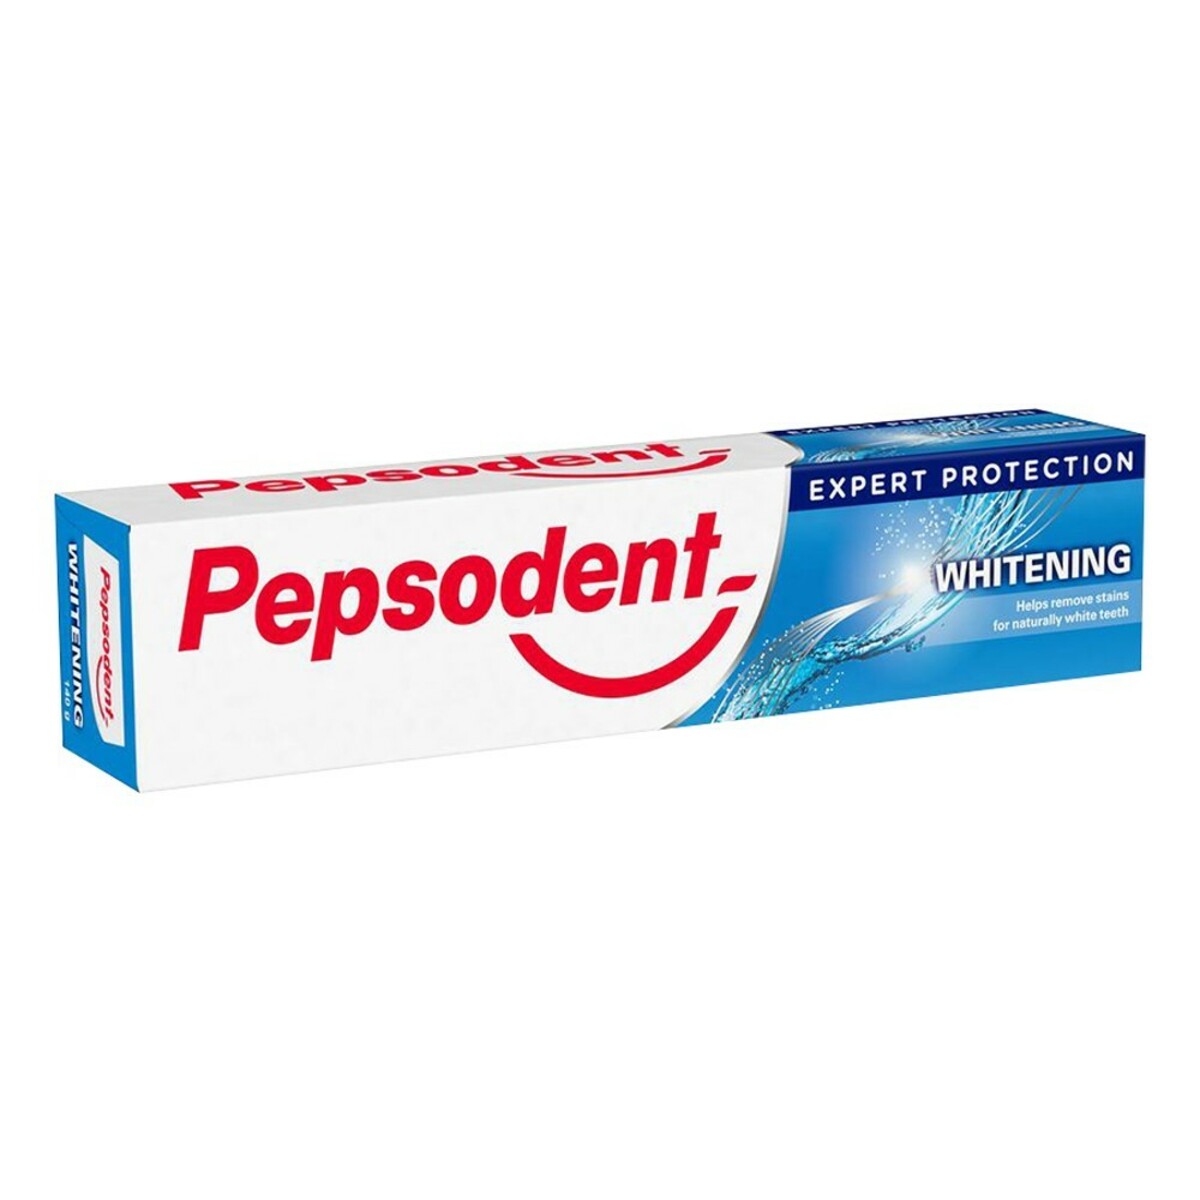 Pepsodent  Tooth Paste  Expert Protection Whitening 140g